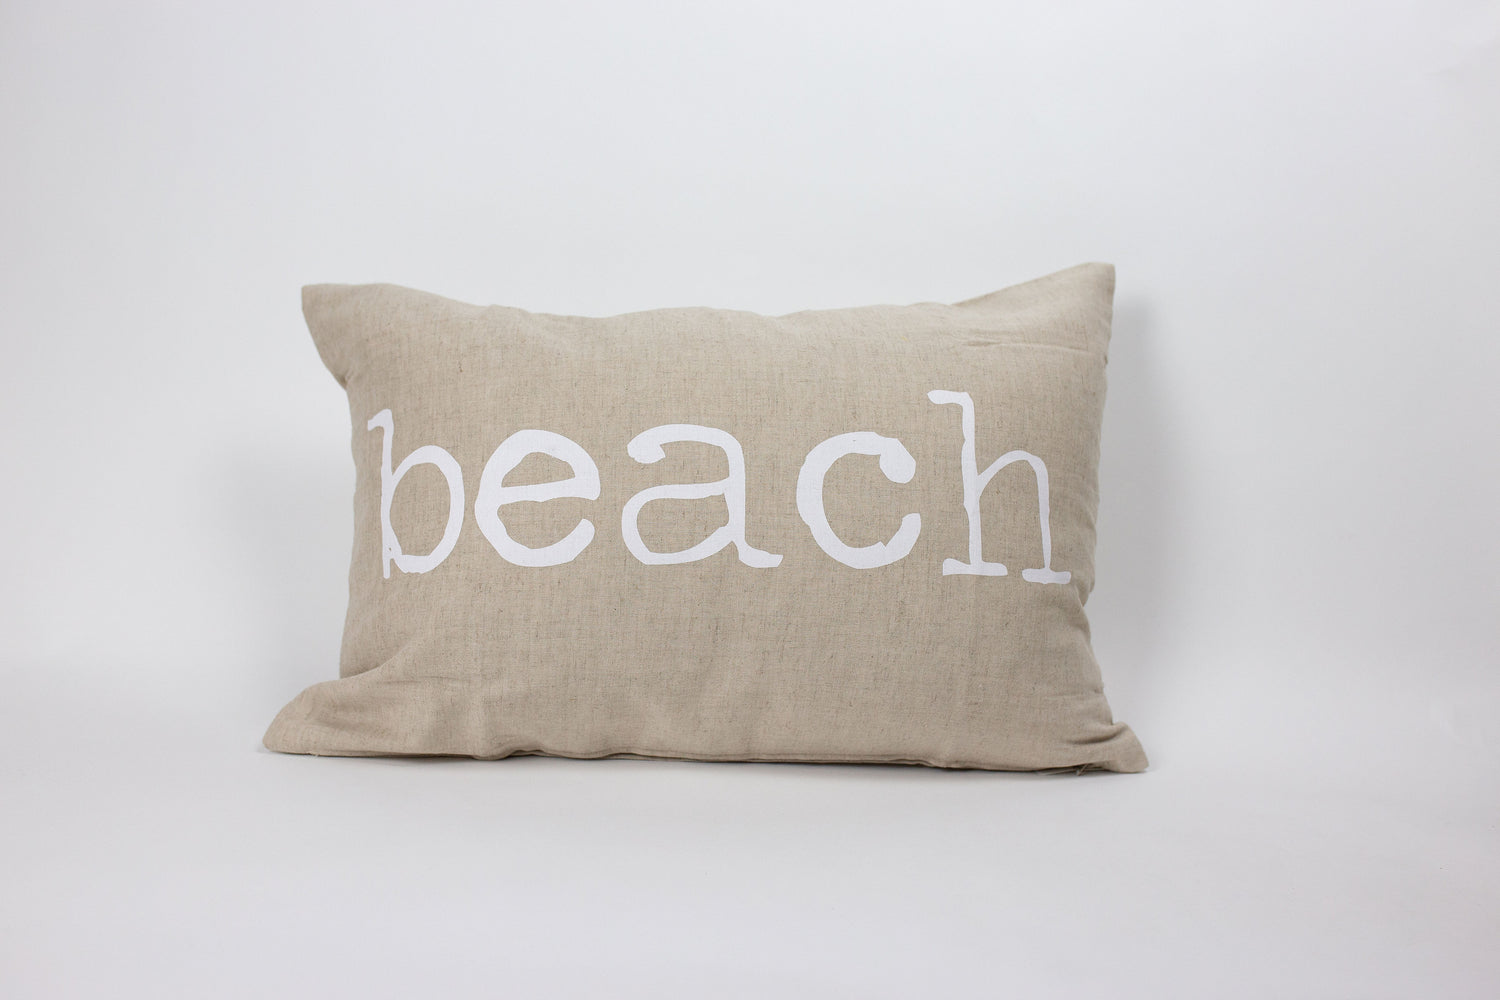 Screen-printed Pillows and Linens